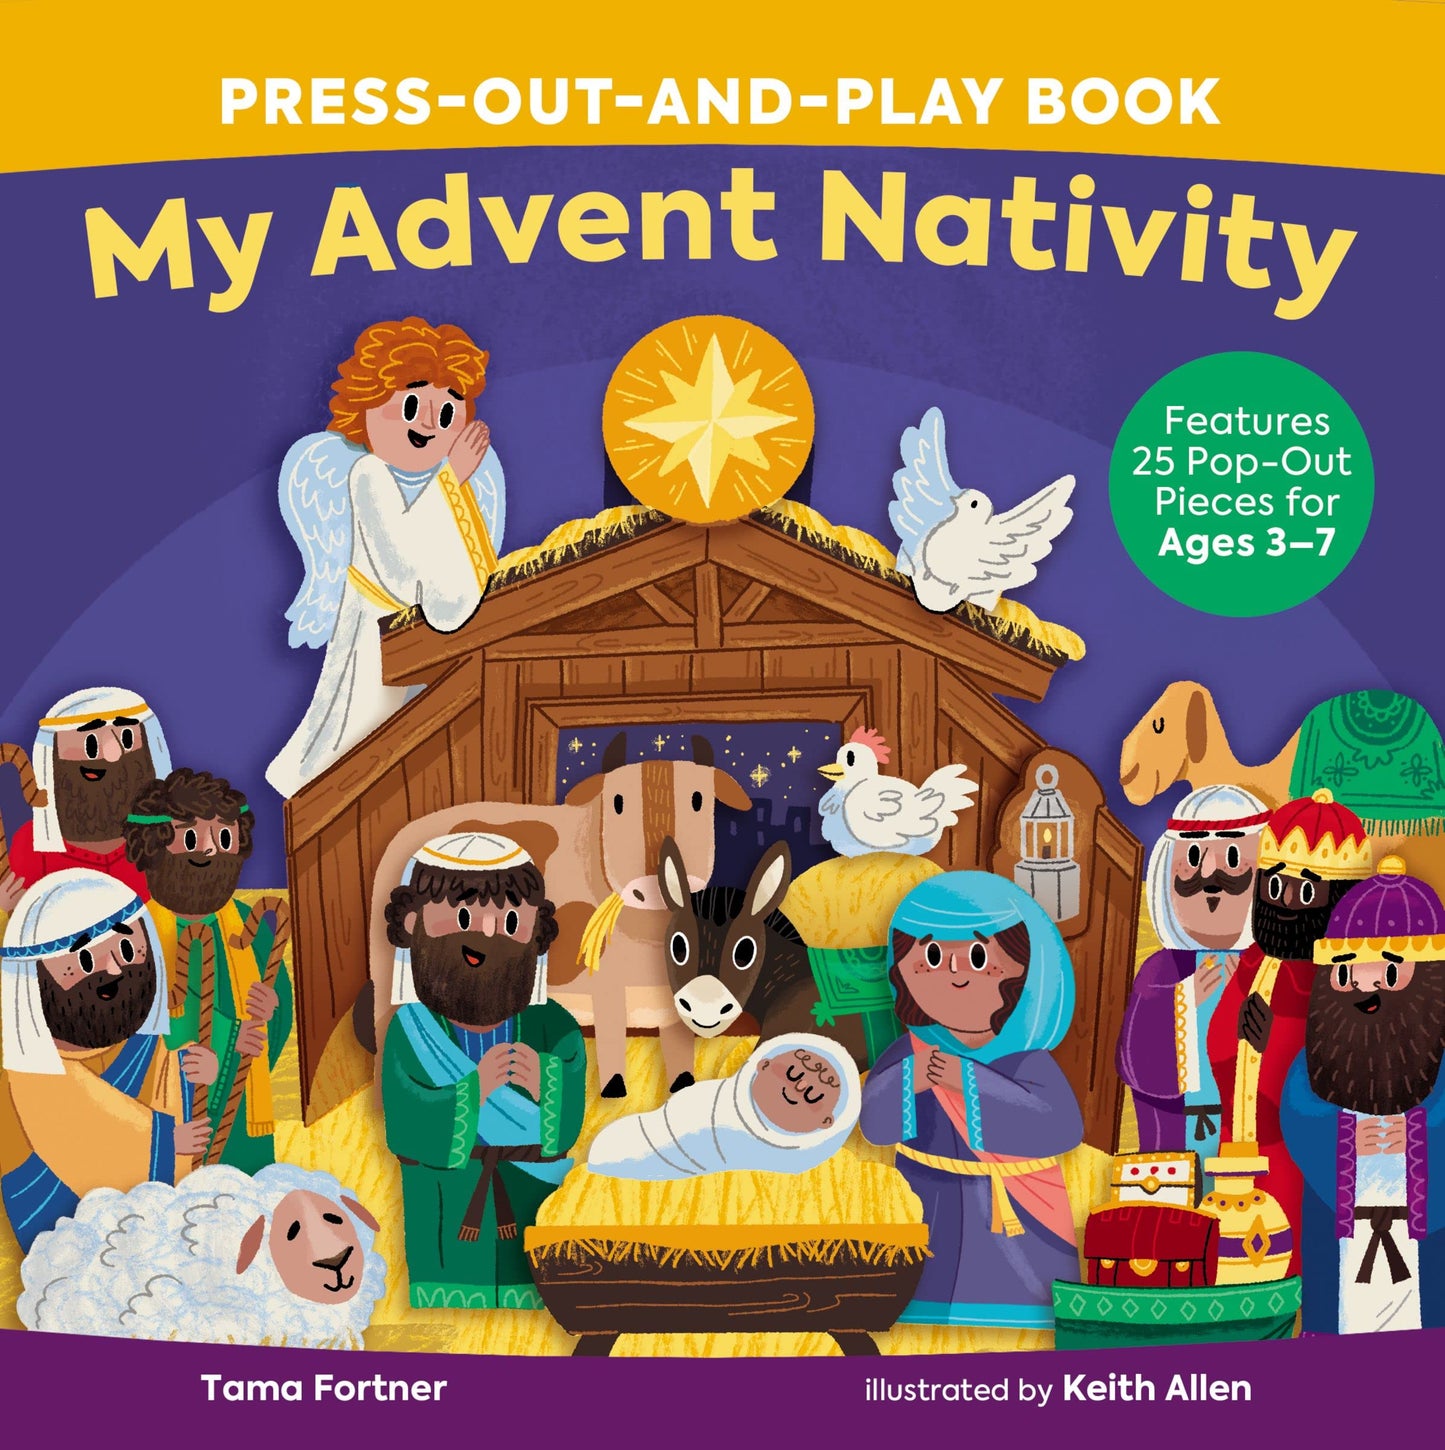 My Advent Nativity Press-Out-And-Play Book: Features 25 Pop-Out Pieces for Ages 3-7